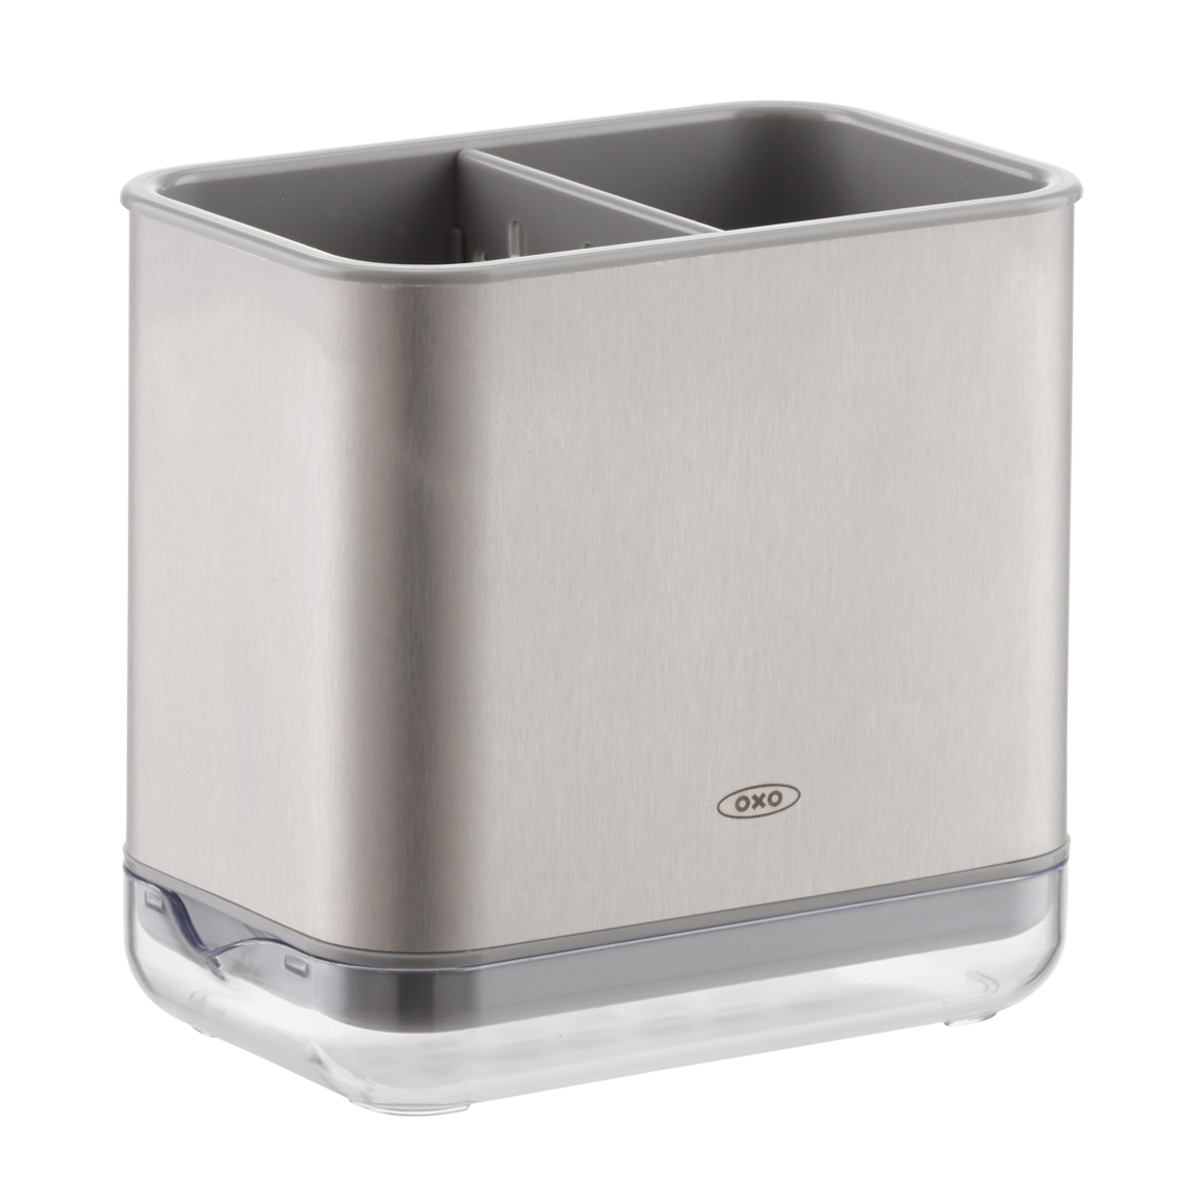 https://www.containerstore.com/catalogimages/316736/10071756-sink-caddy-stainless-steel_.jpg